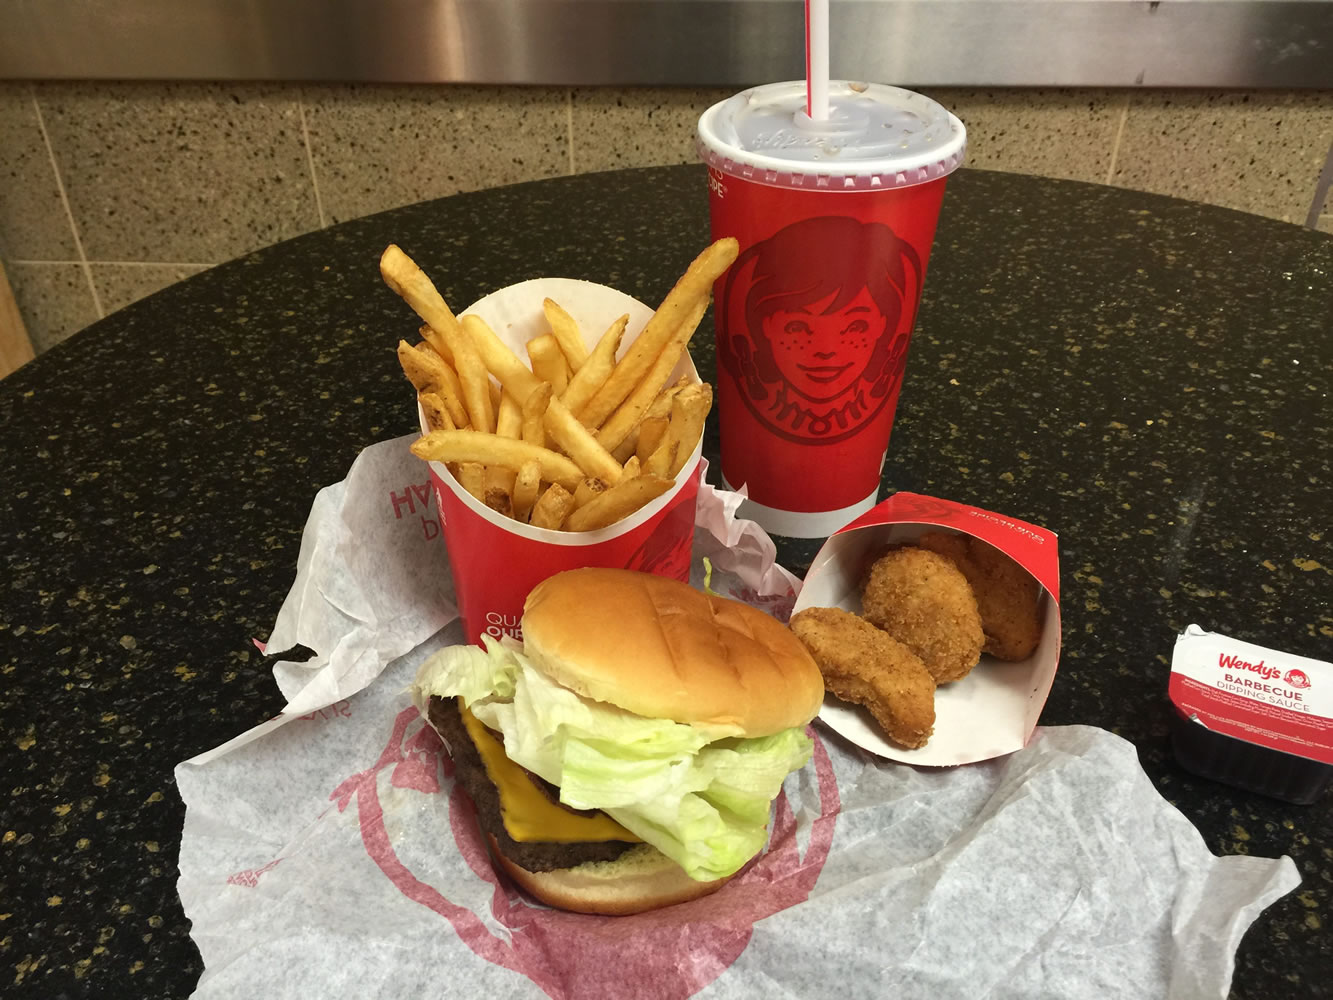 The &quot;4 for $4 deal,&quot; at a Wendy&#039;s restaurant.